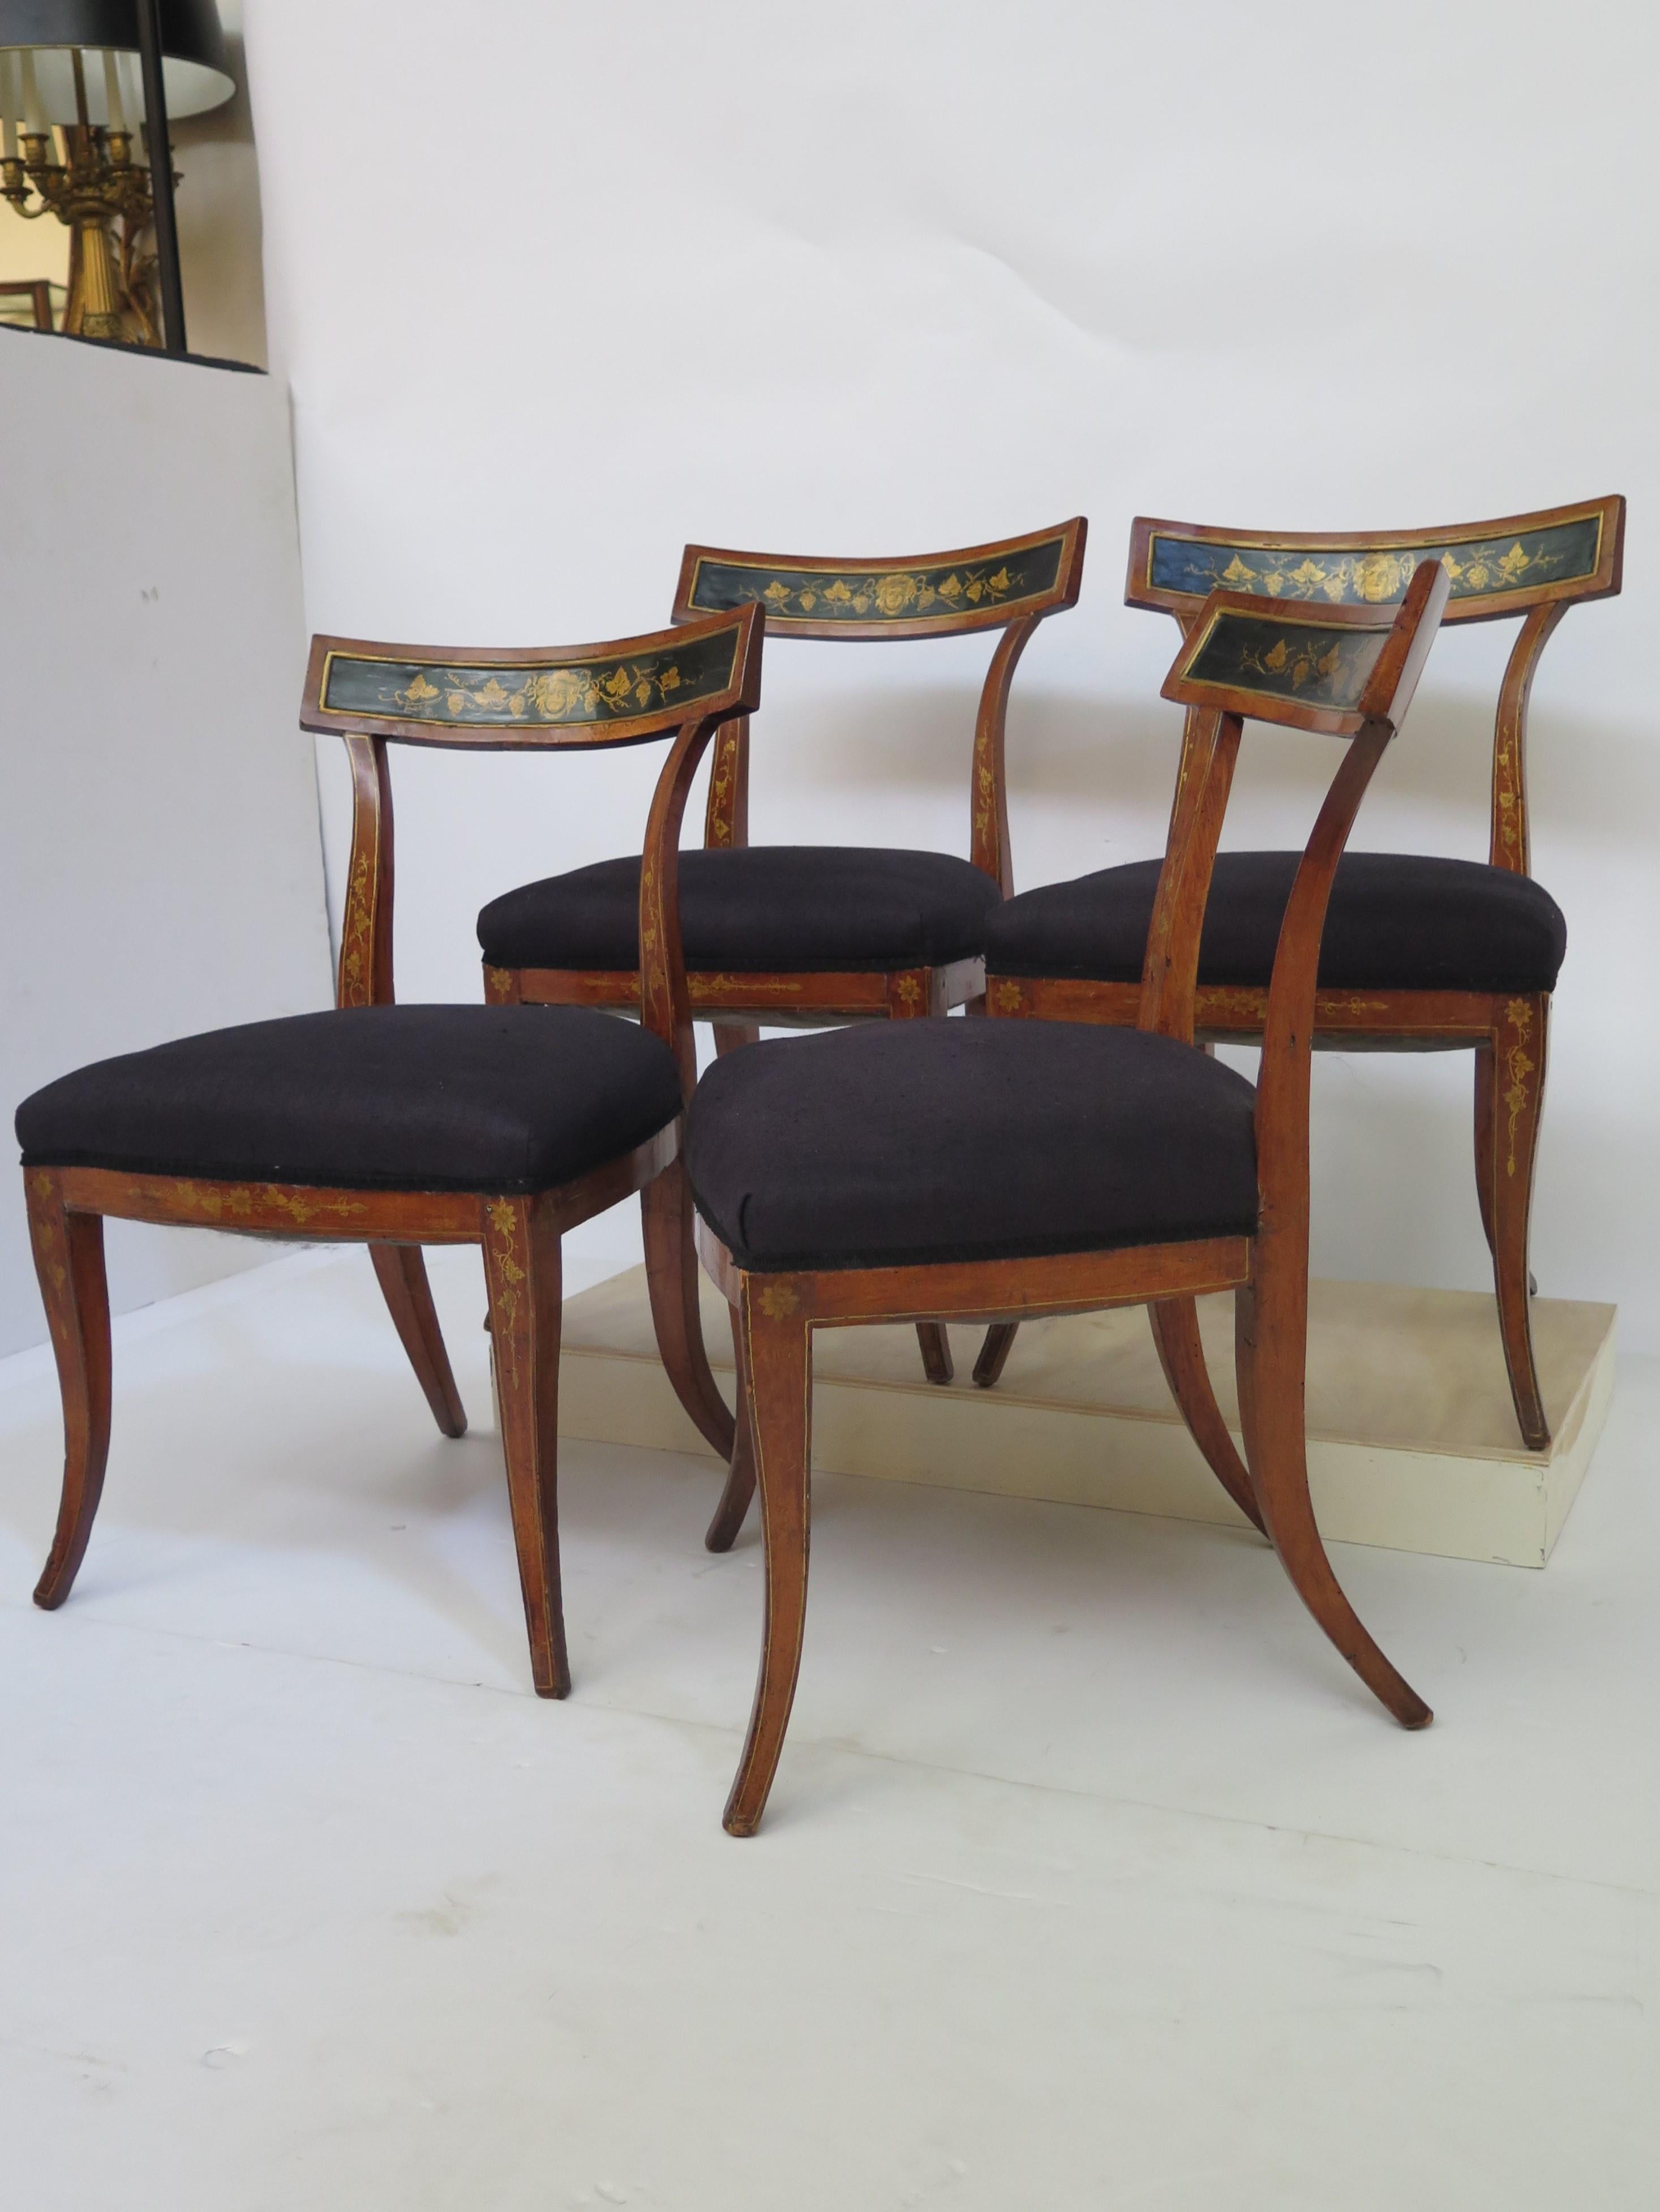 19th Century Set of Four English Regency Fruitwood Side Chairs, Chinoiserie Decorated